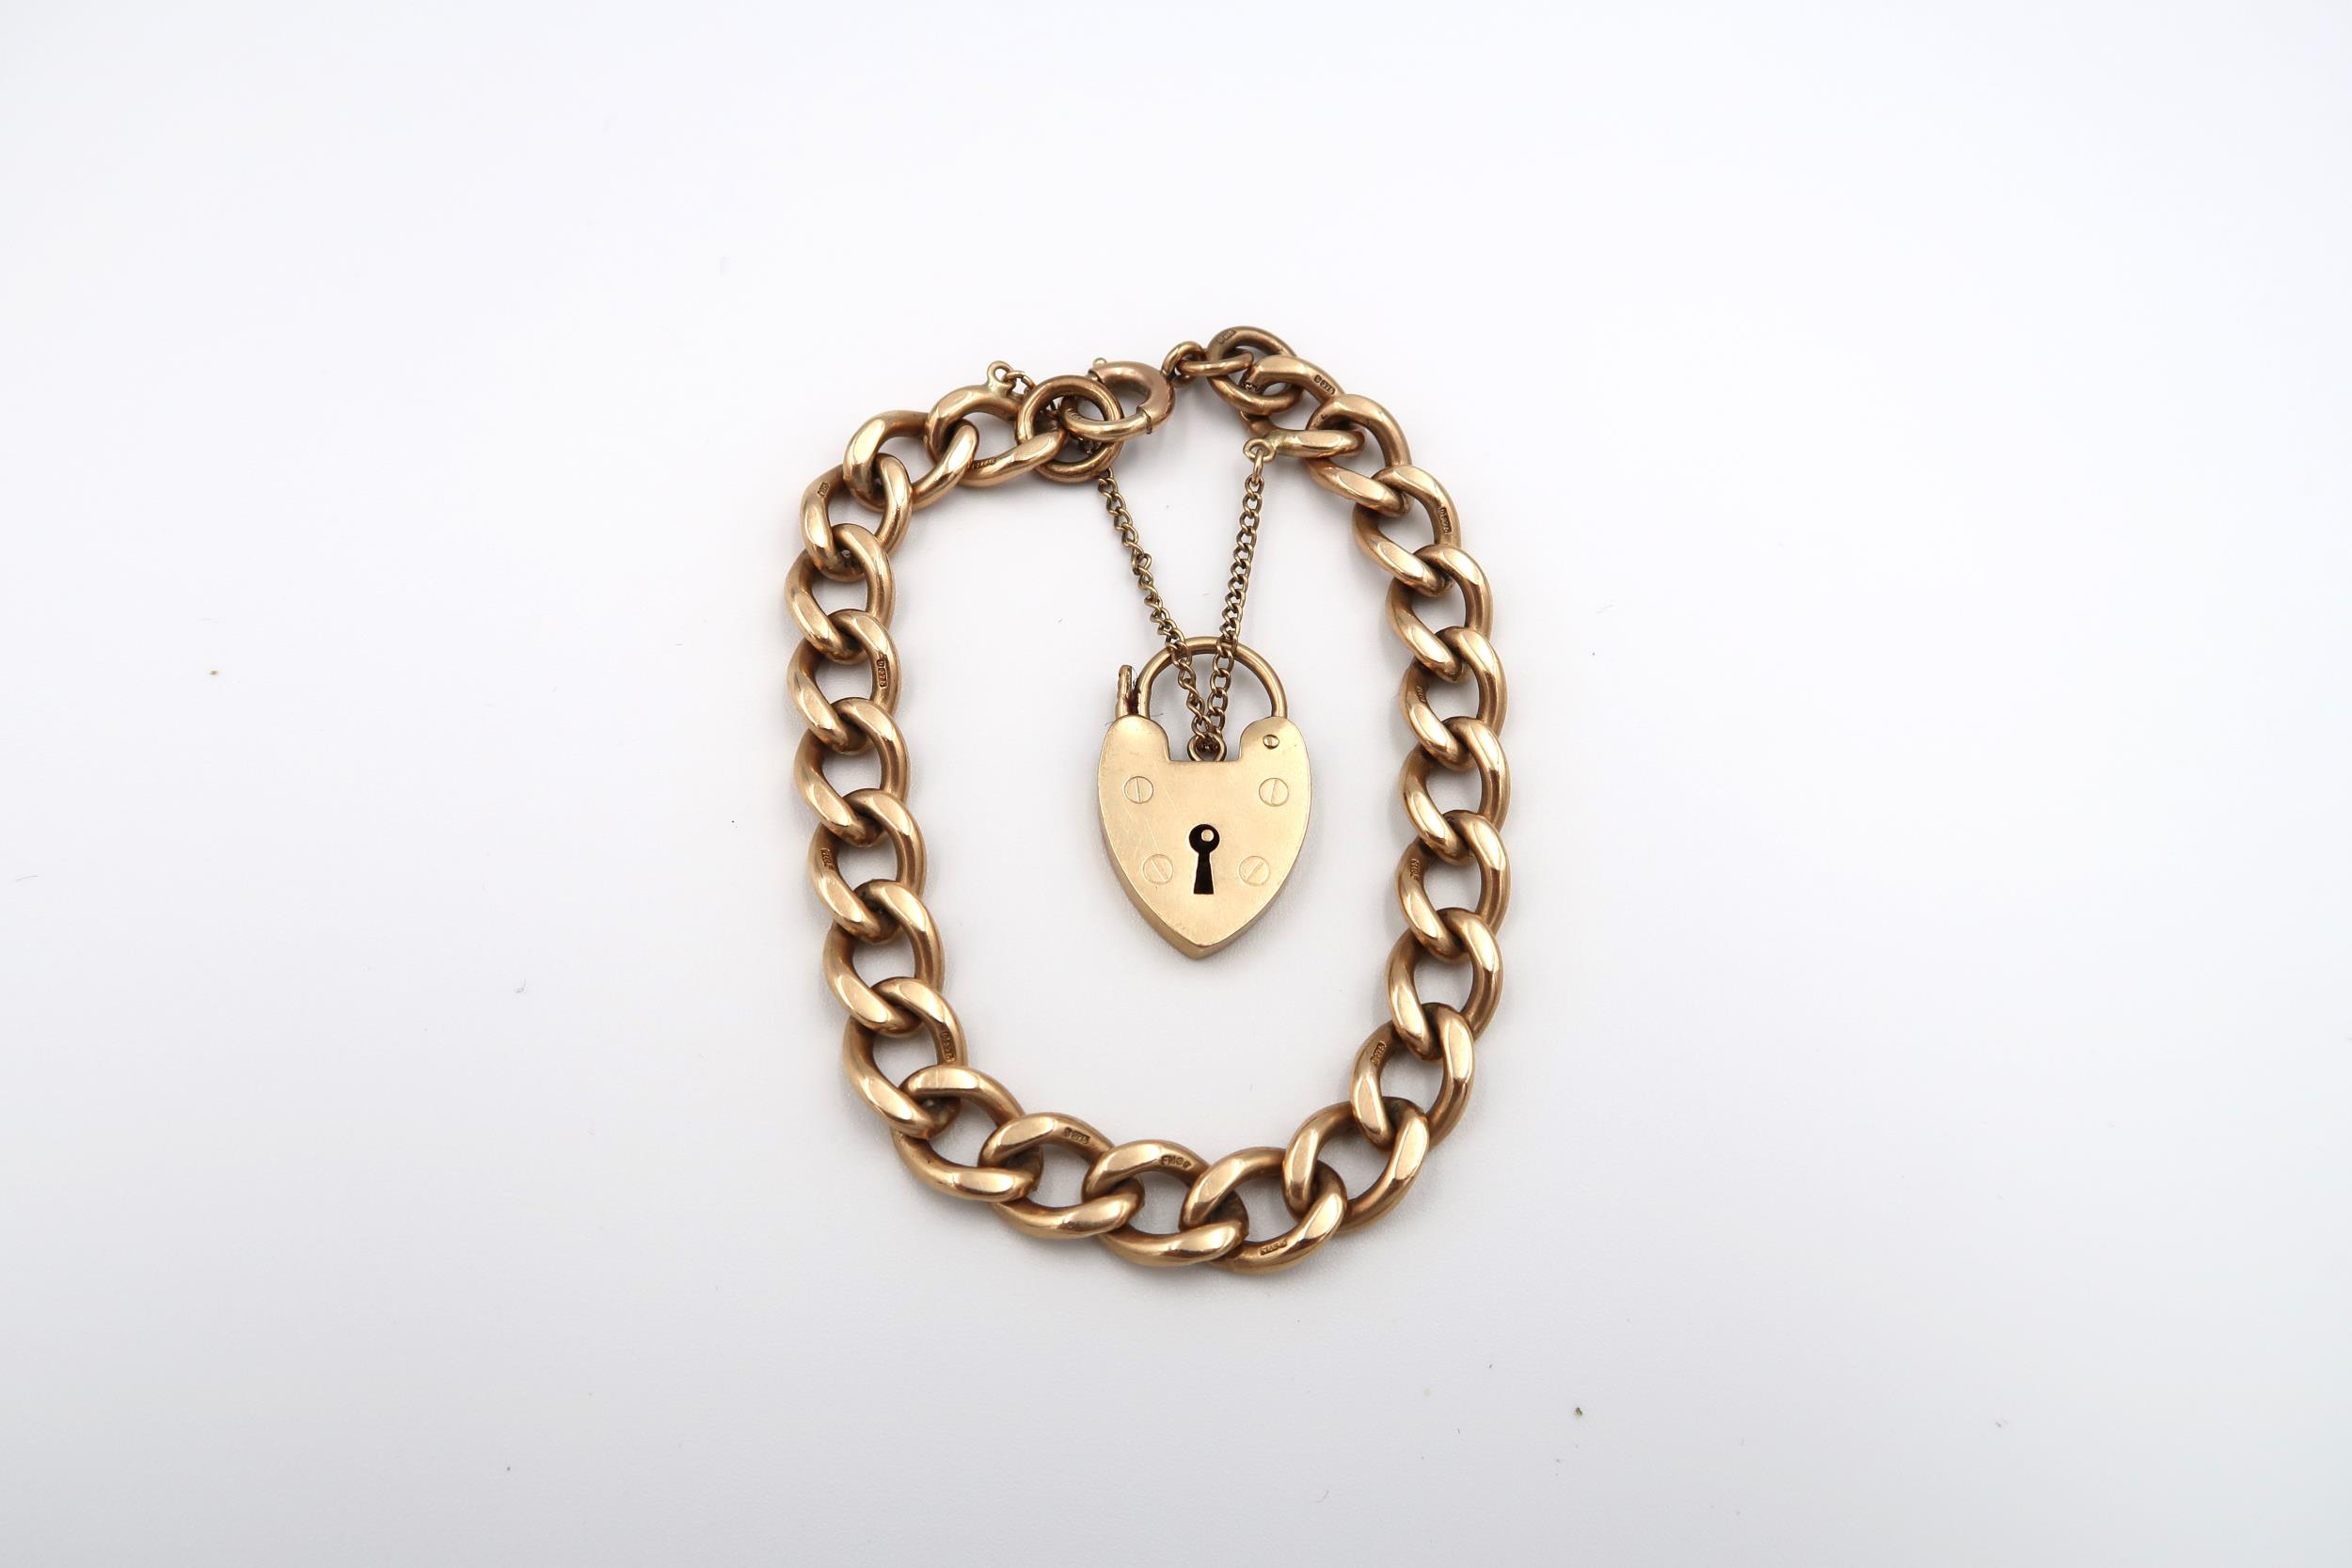 A 9ct yellow gold bracelet with heart lock, 31.8 grams